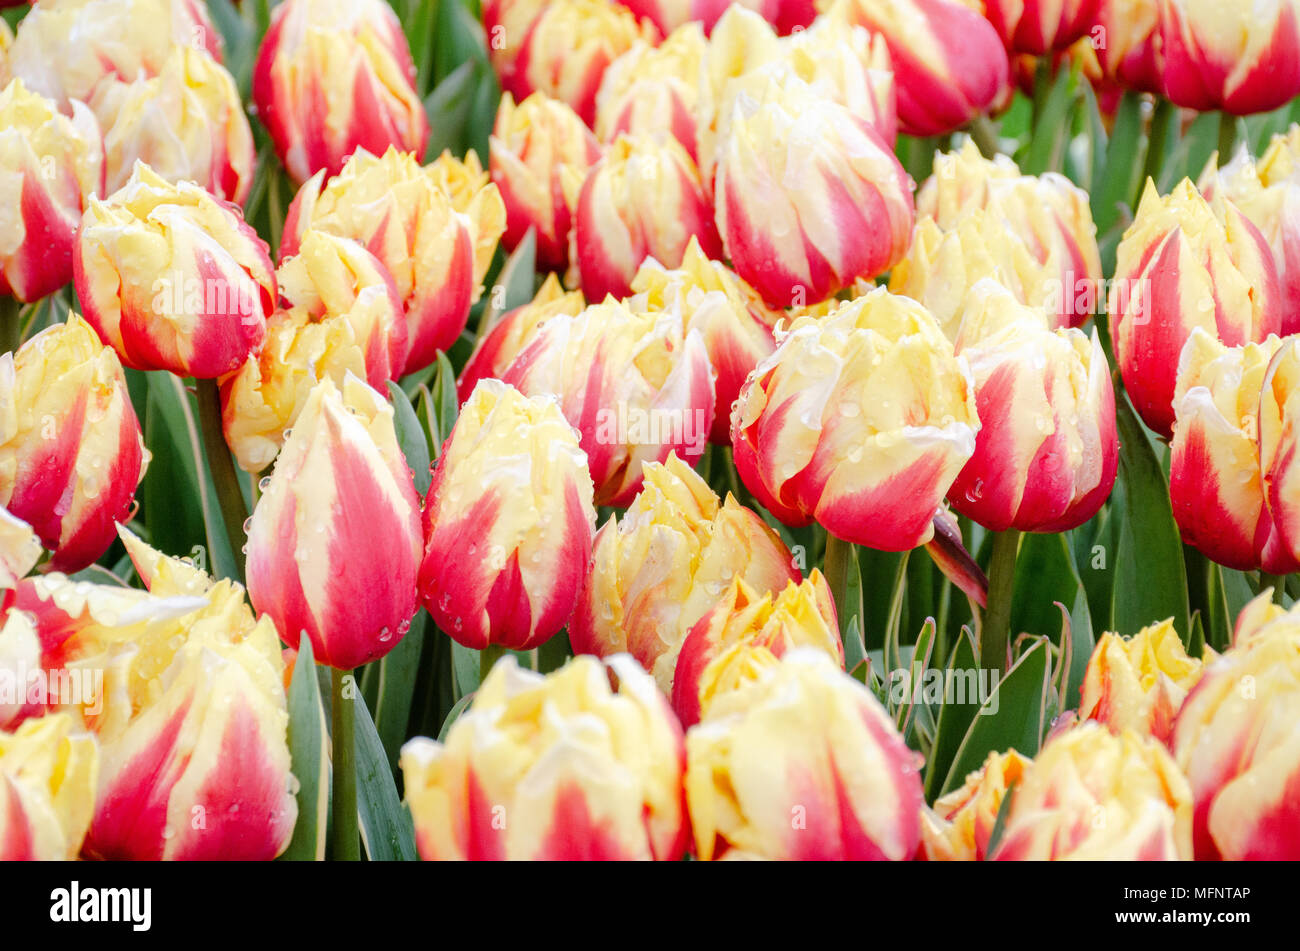 Orange and yelow Tulips in large group Stock Photo